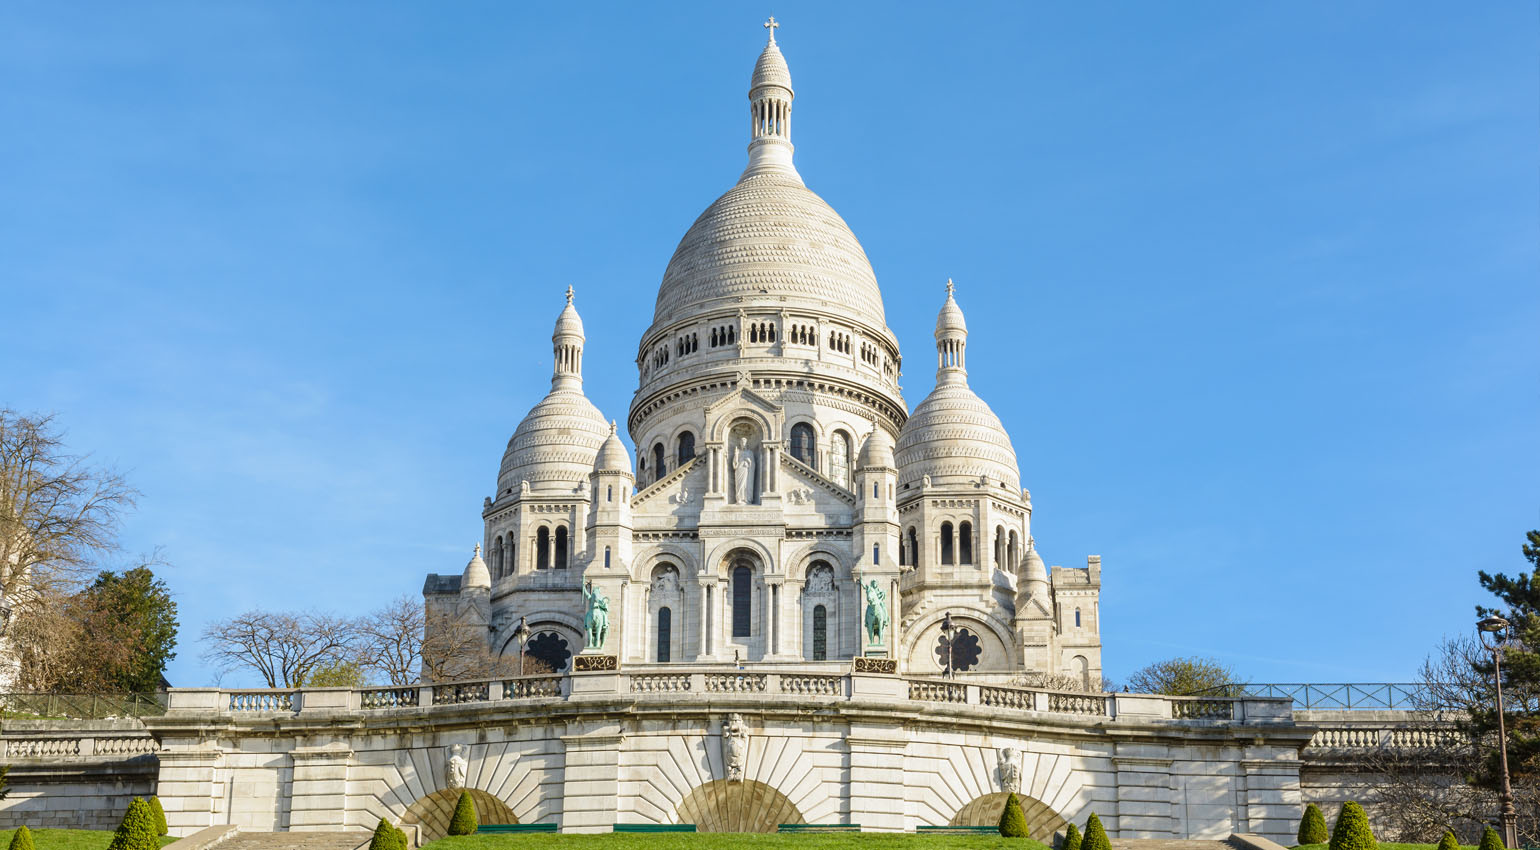 Emily in Paris Filming Locations - The Basilica of the Sacred Heart of Paris